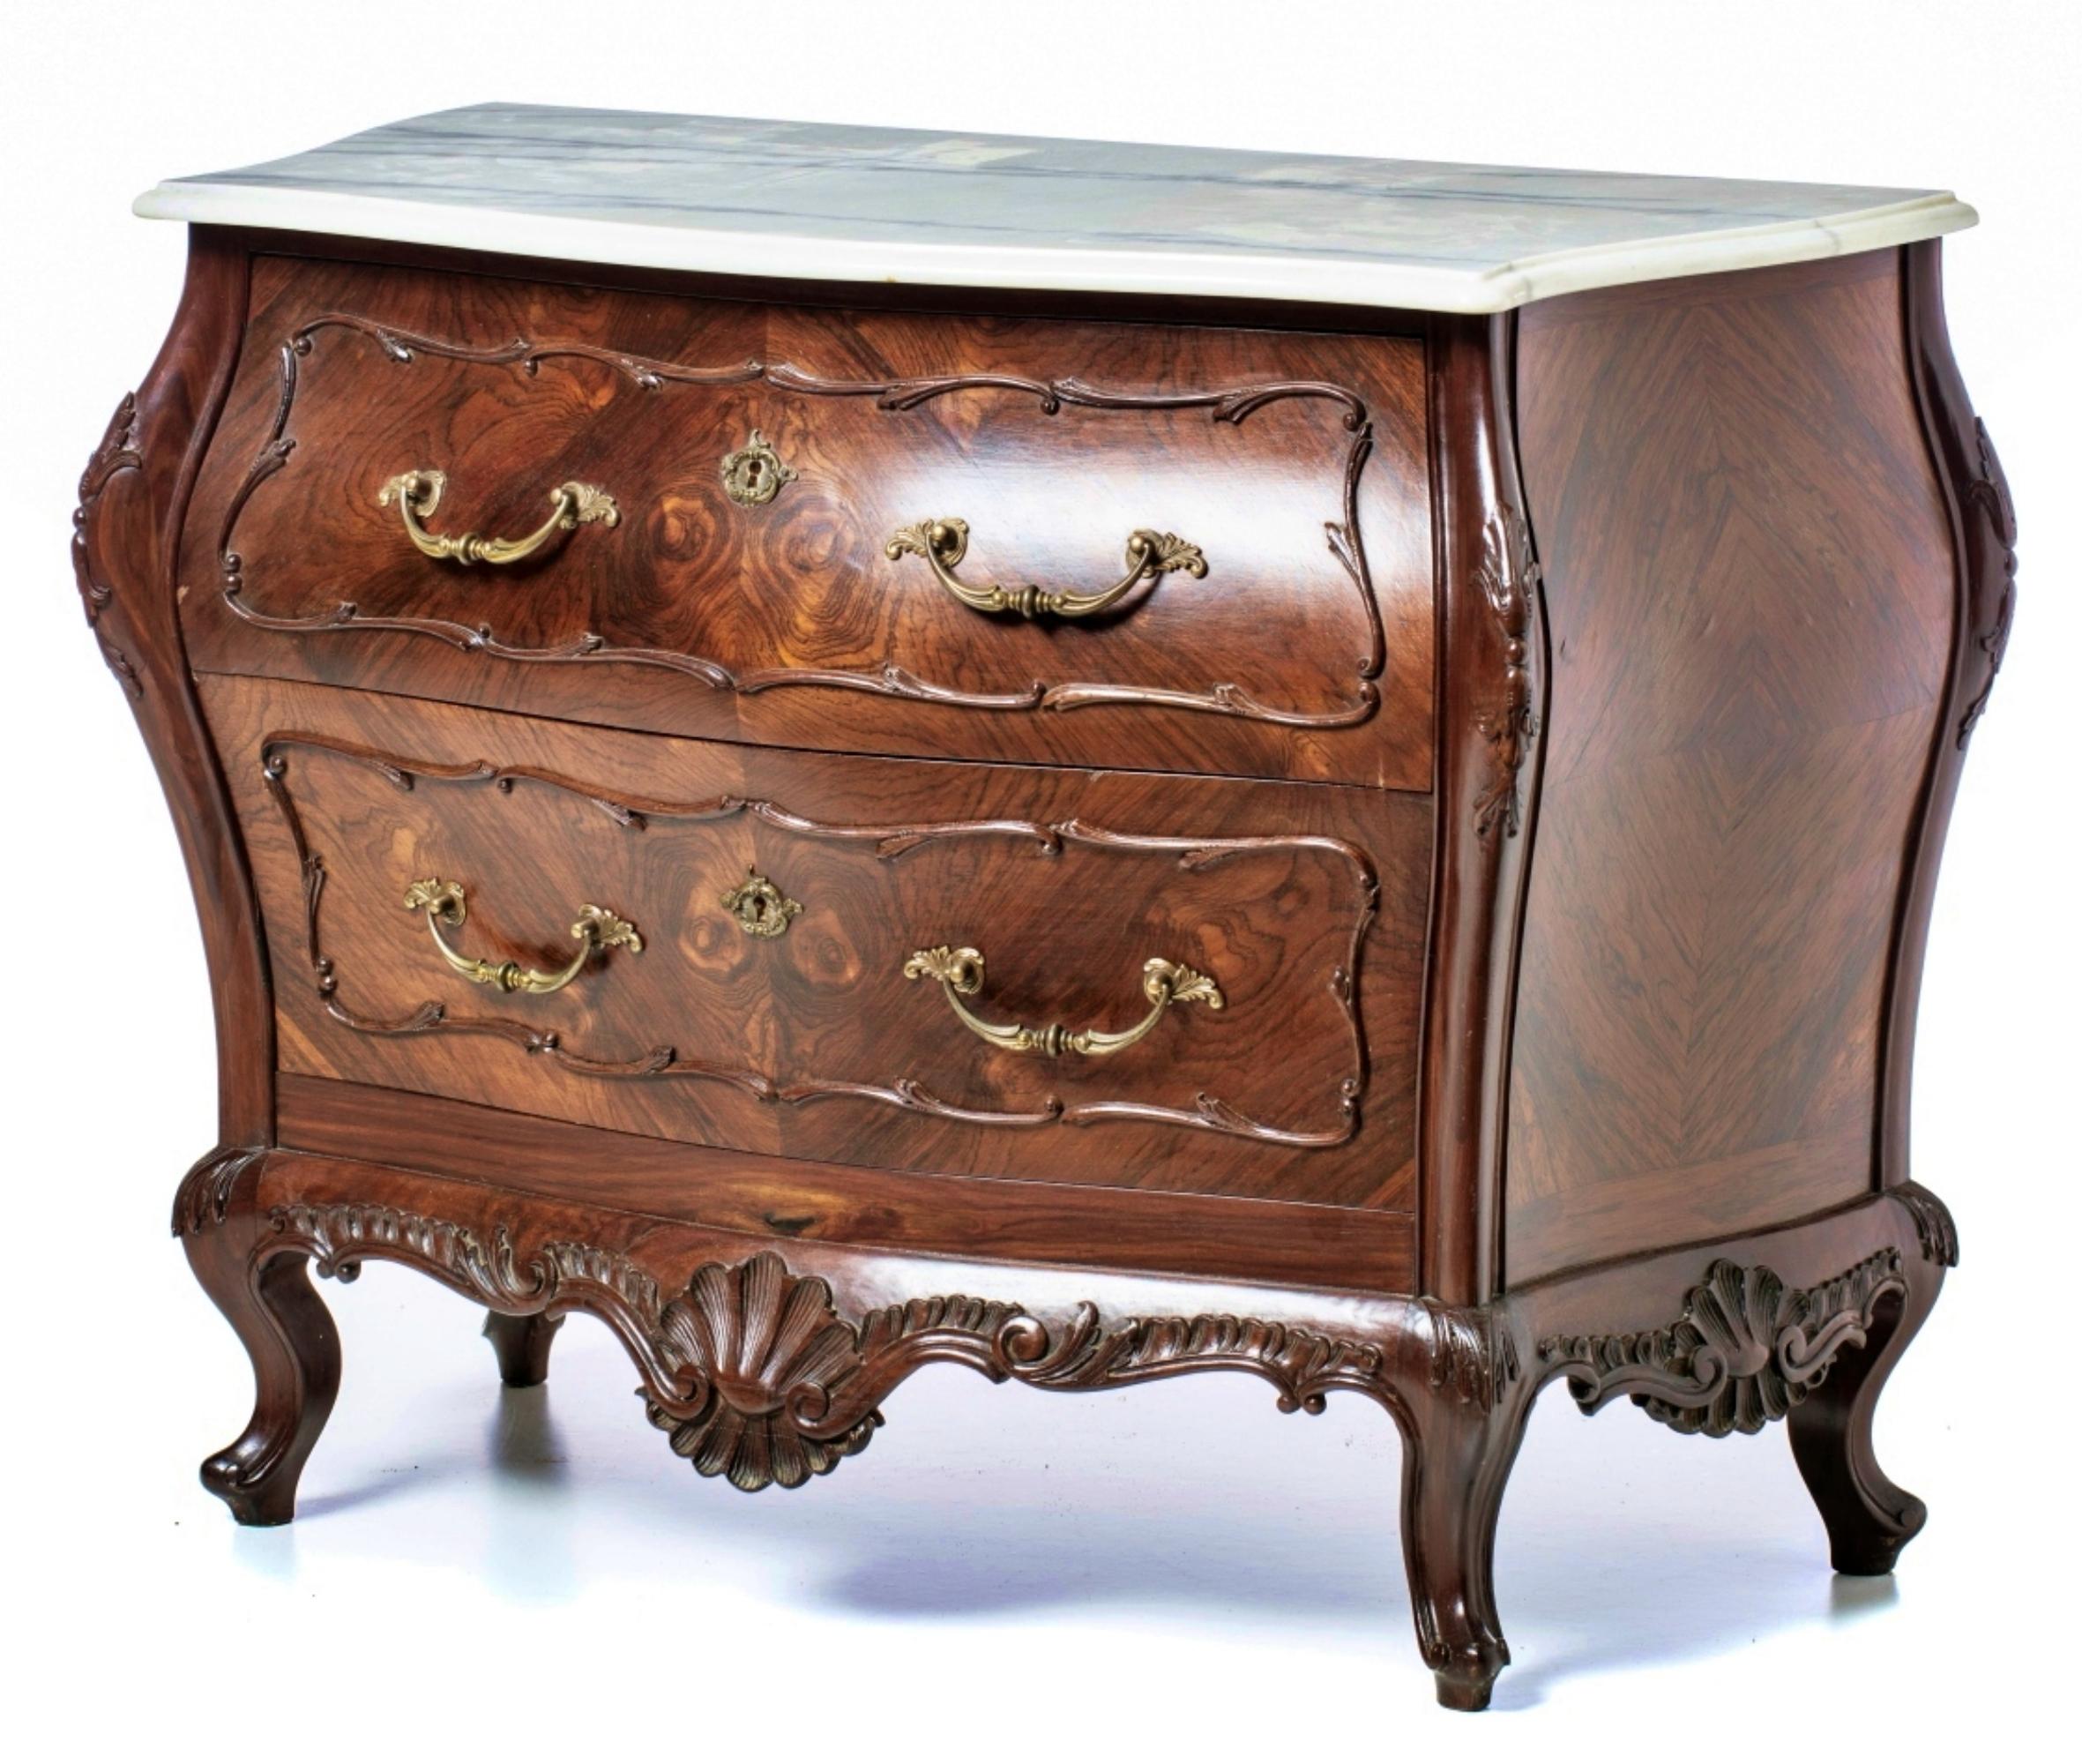 Portuguese commode
Beginning 20th Century
in Brazilian rosewood veneered mahogany, corrugated box with 2 drawers. 
Marble top and metal hardware. 
Dim.: 81 x 102 x 51 cm.